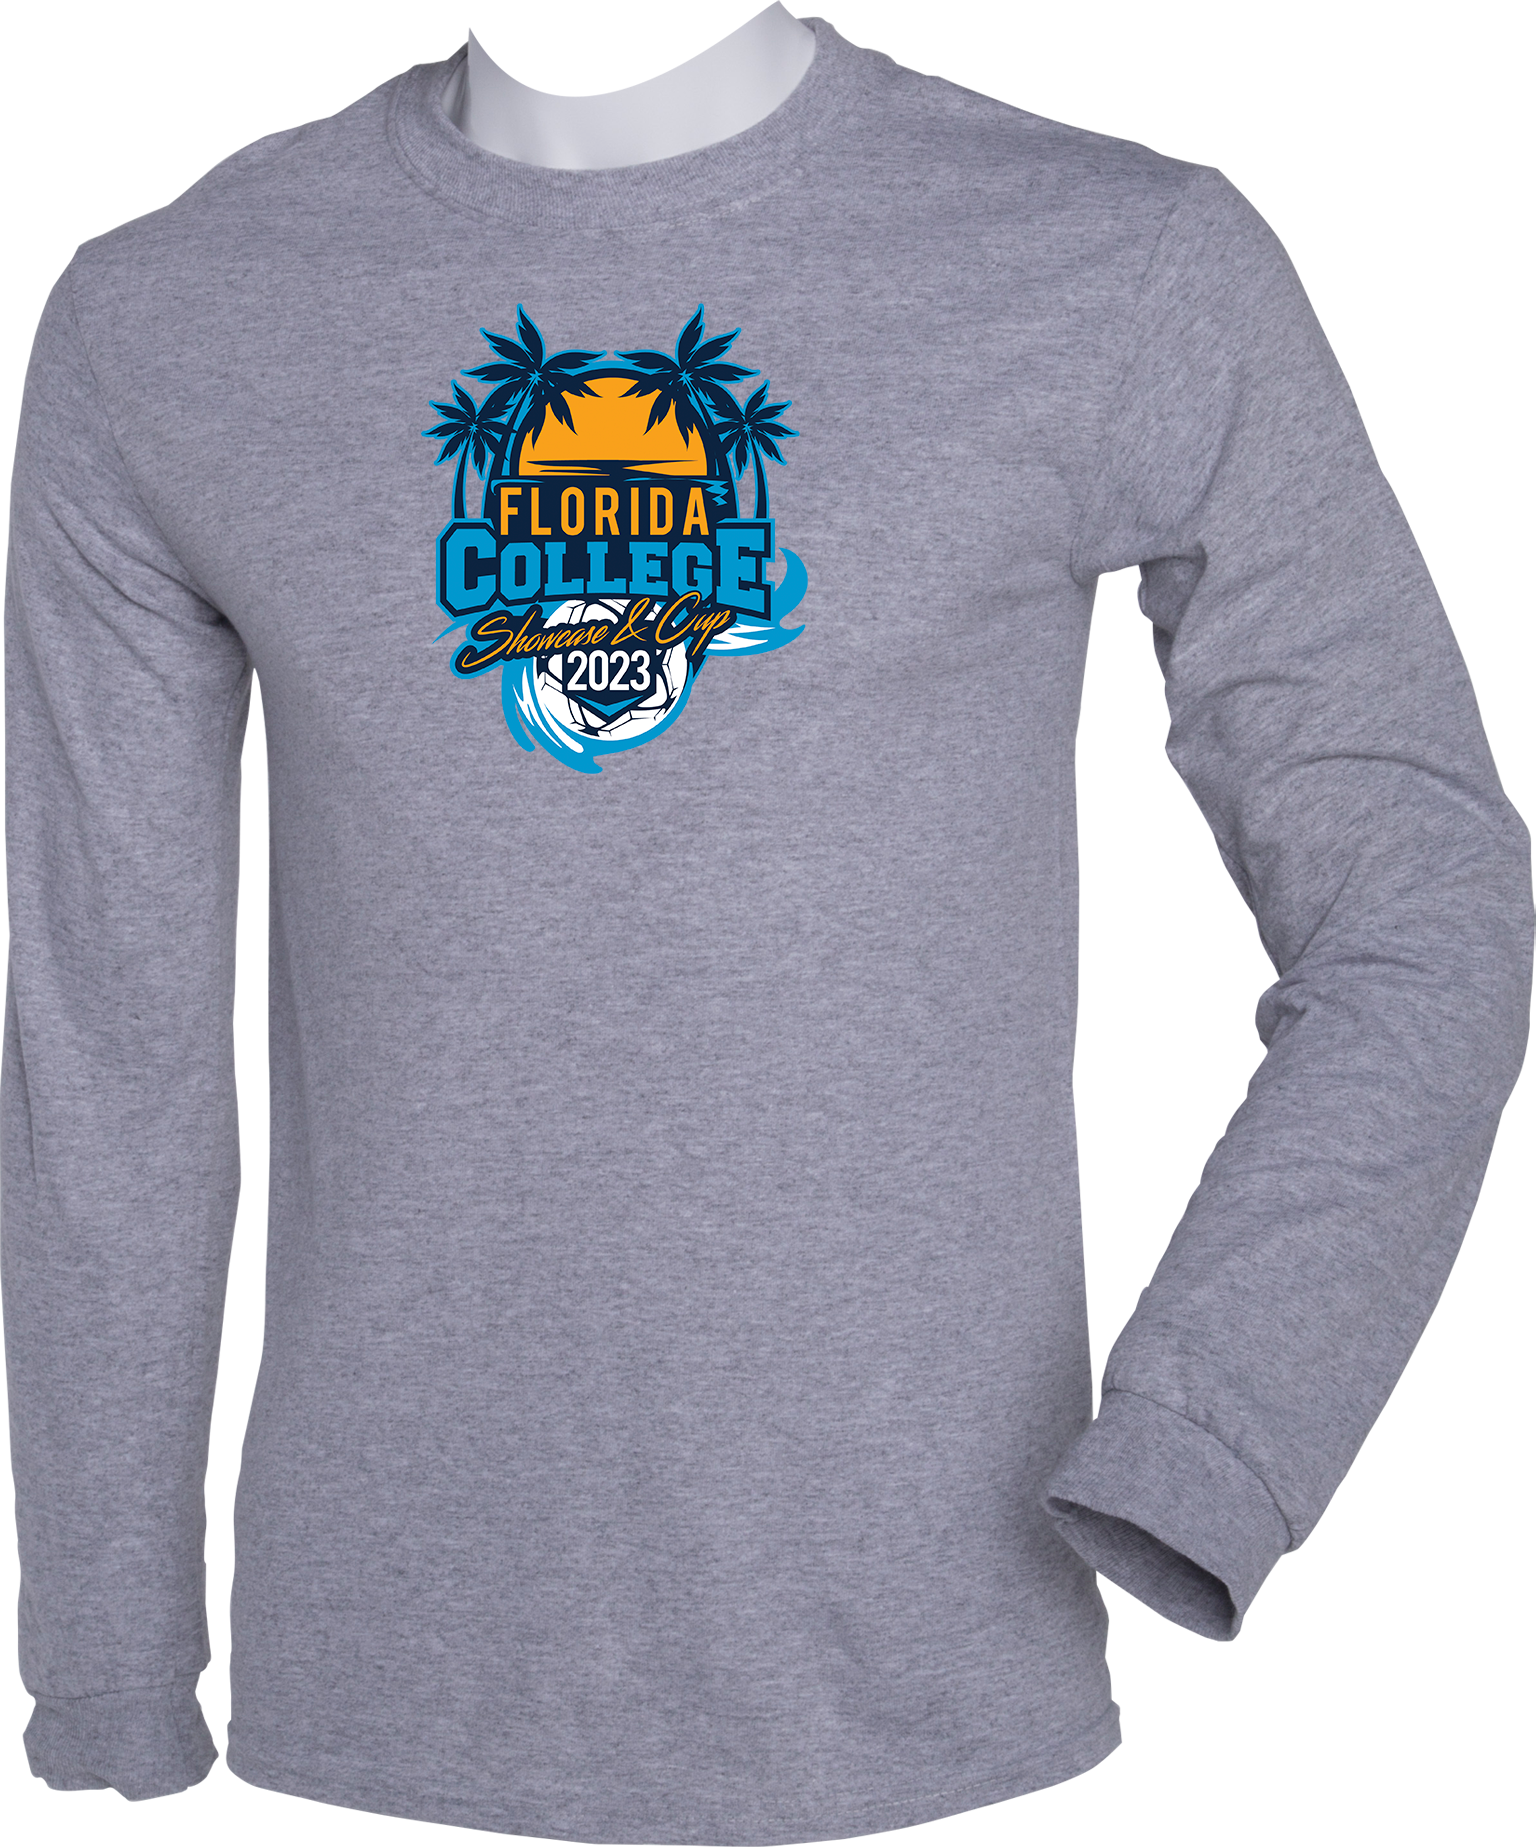 LONG SLEEVES - 2023 Florida College Showcase and Cup